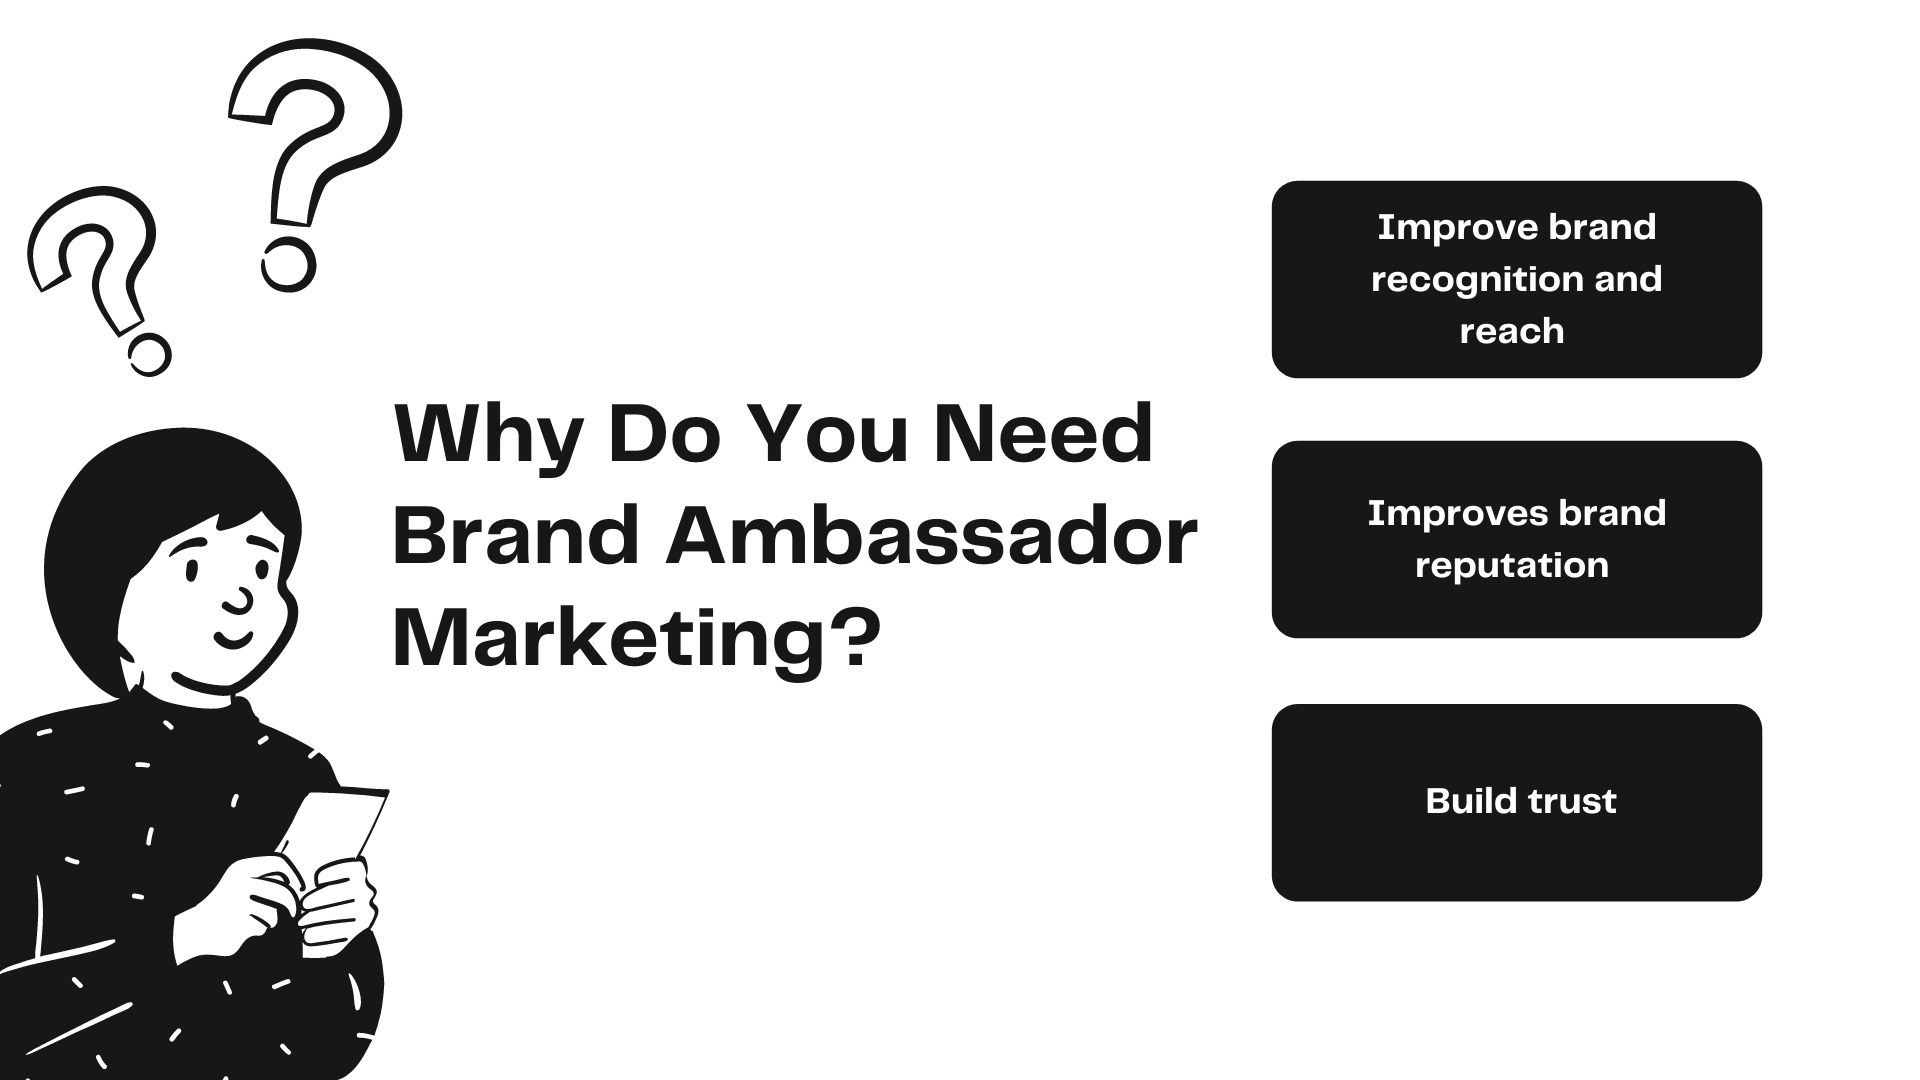 Brand Ambassador Marketing: The Key To Growing Your Business